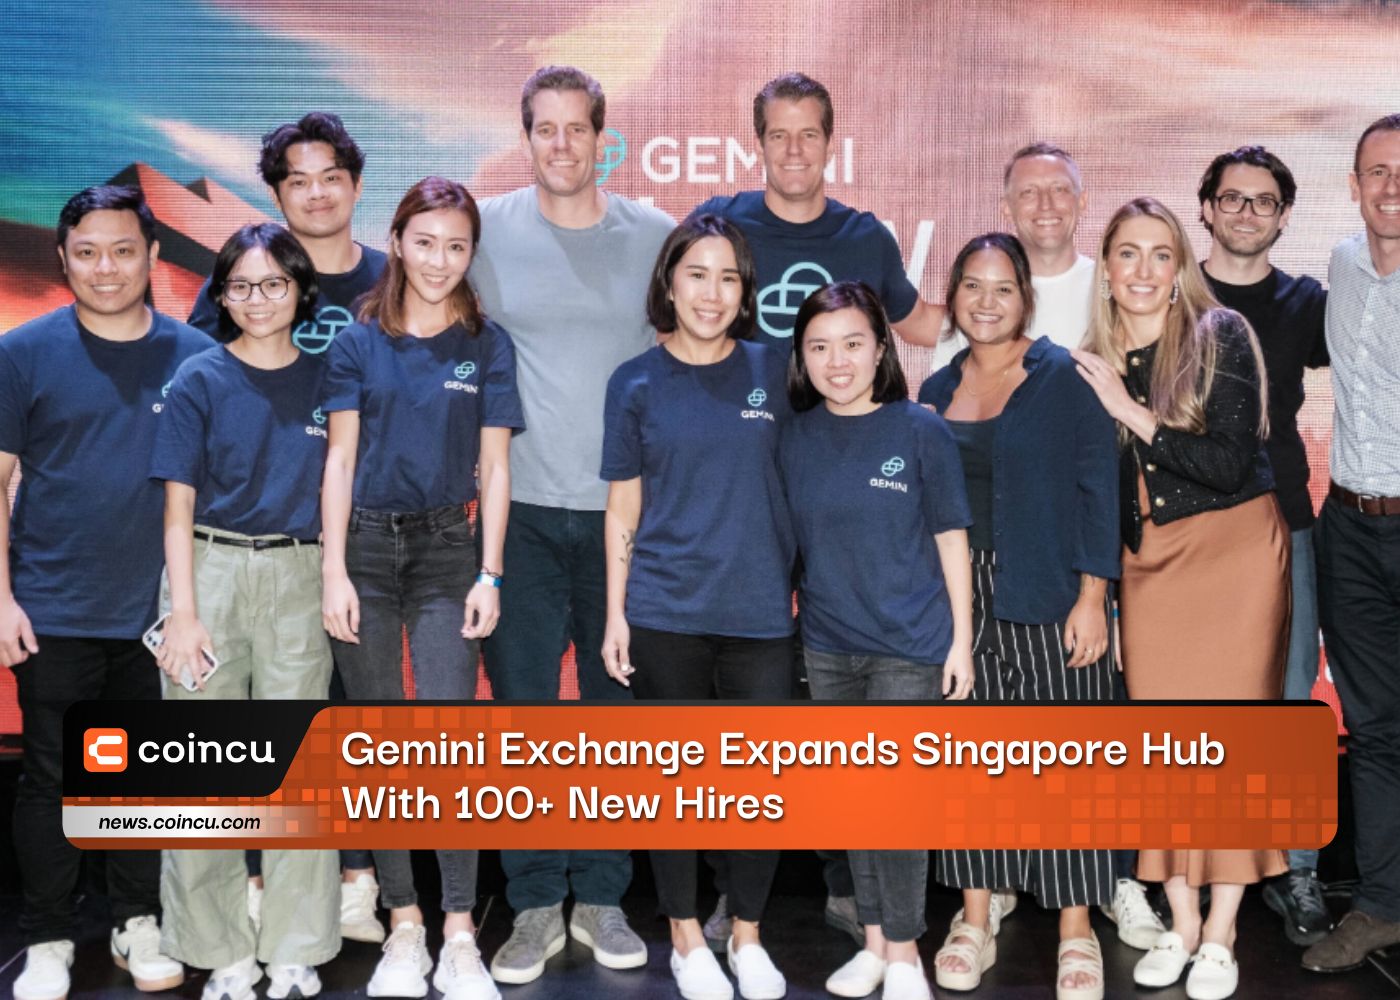 Gemini Exchange Expands Singapore Hub With 100+ New Hires